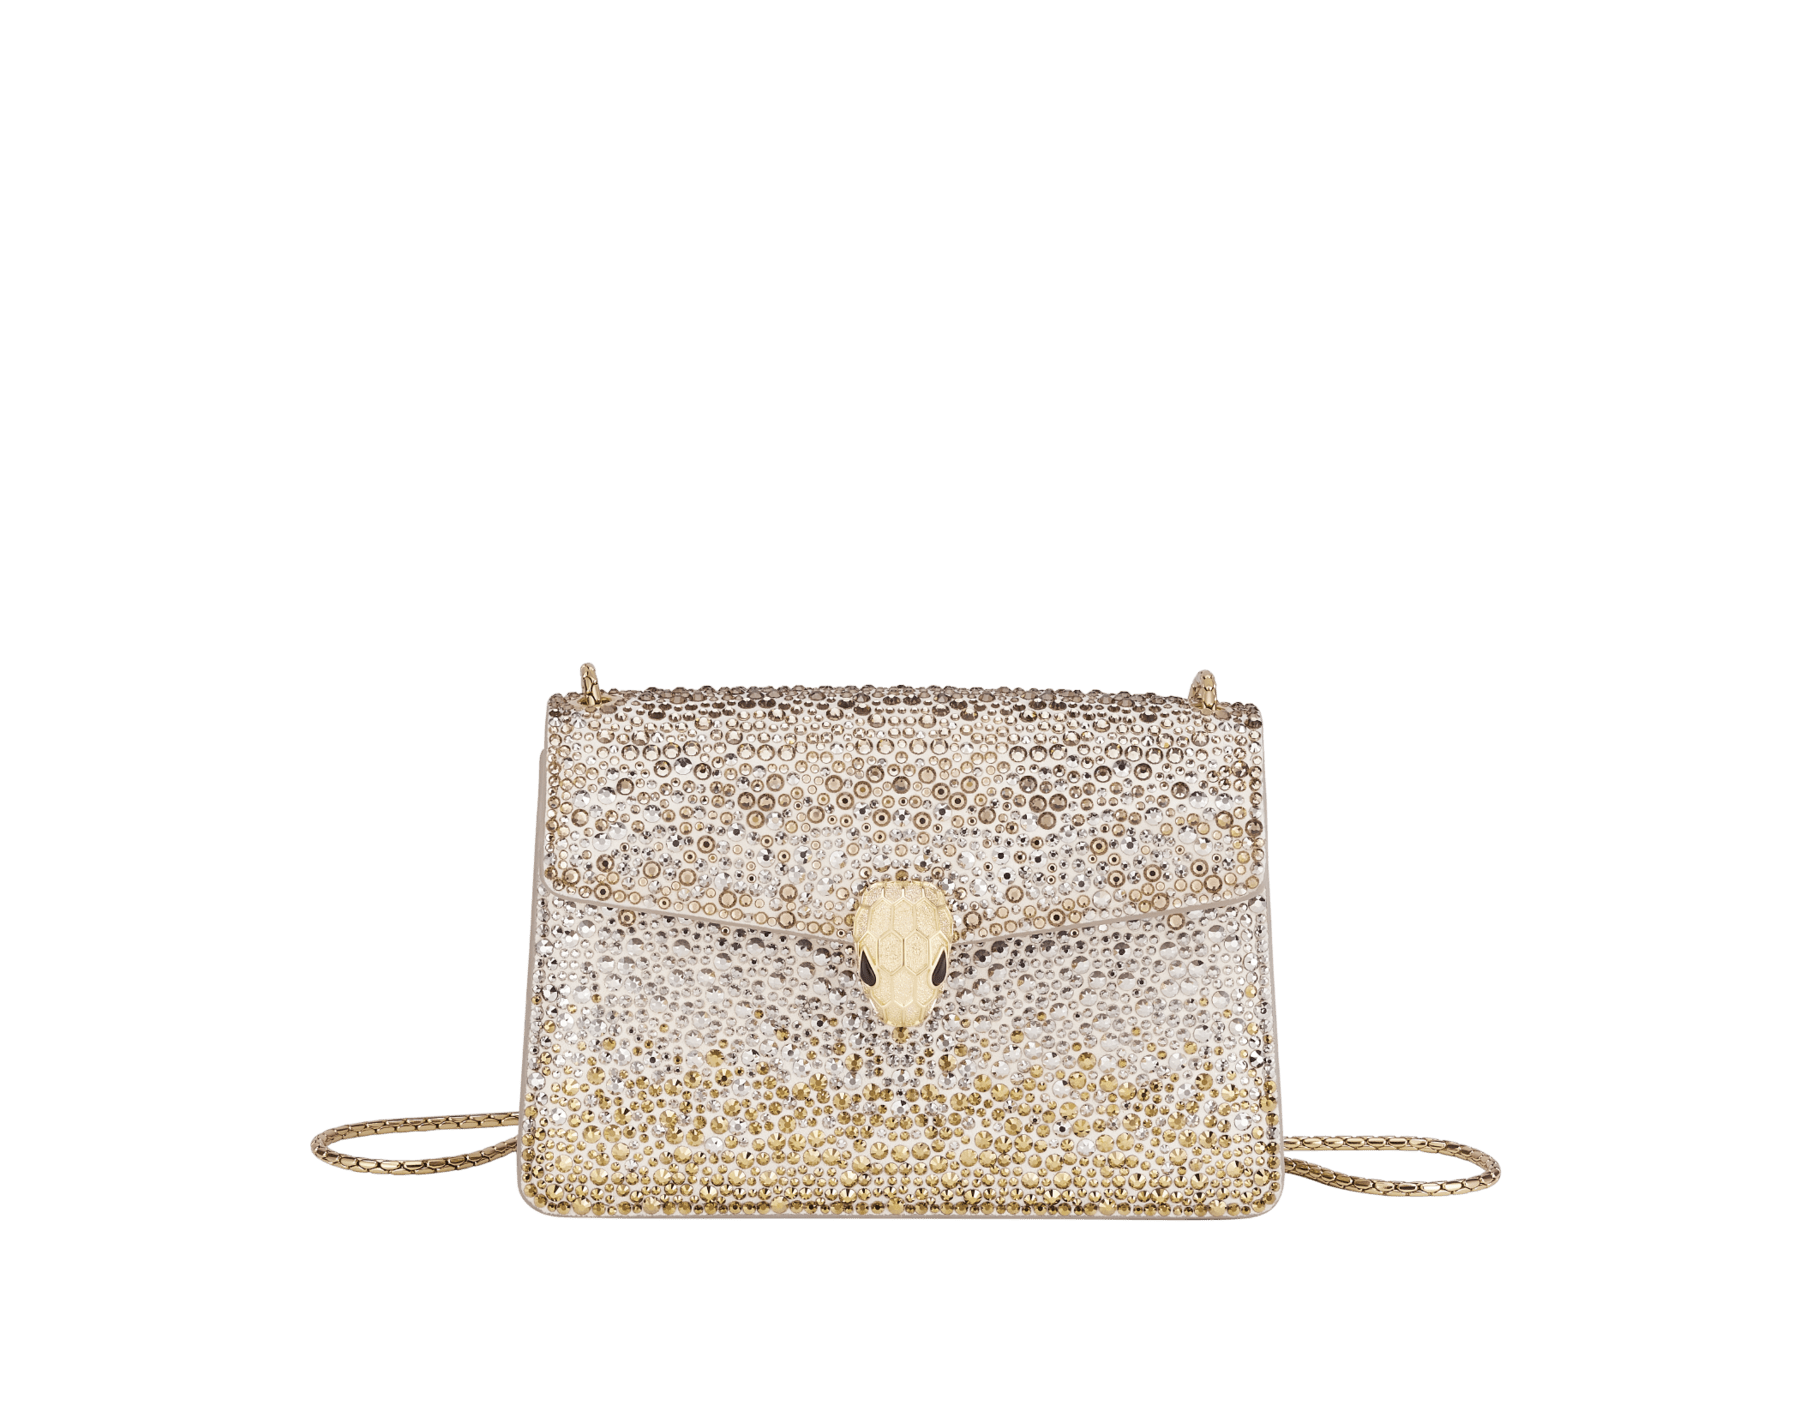 Serpenti Forever mini crossbody bag in natural suede with different-size gold crystals and black nappa leather lining. Captivating magnetic snakehead closure in gold-plated brass embellished with "diamantatura" engraving on the scales and black onyx eyes. 986-CDS image 1